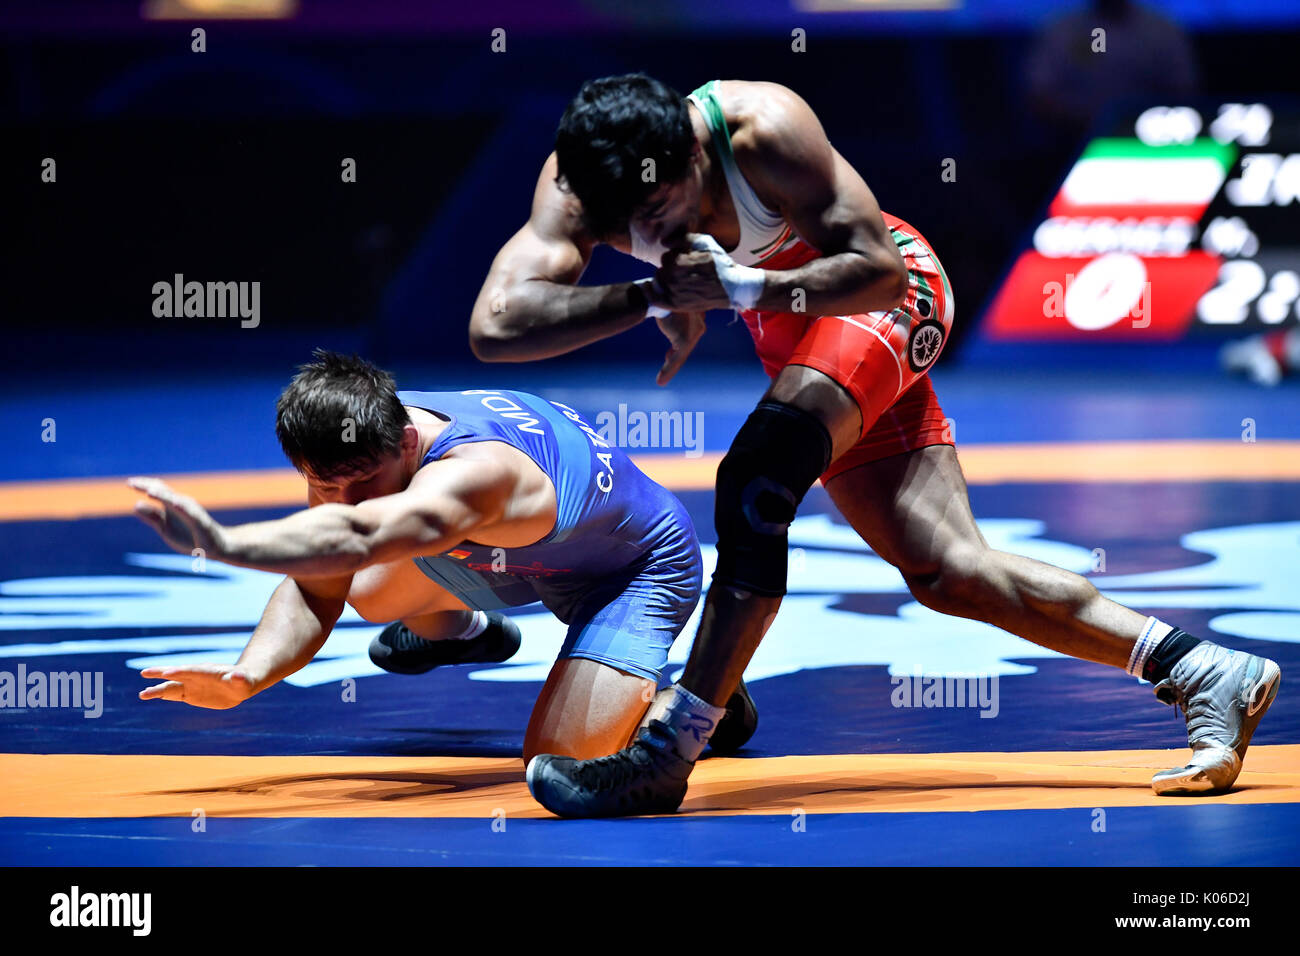 Paris. 21st Aug, 2017. Mohammadali Abdolhamid Geraei of Iran (R) competes  with Daniel Cataraga of Moldova during the bronze match of men's 71kg  Greece-Roman wrestling of the FILA World Wrestling Championships in